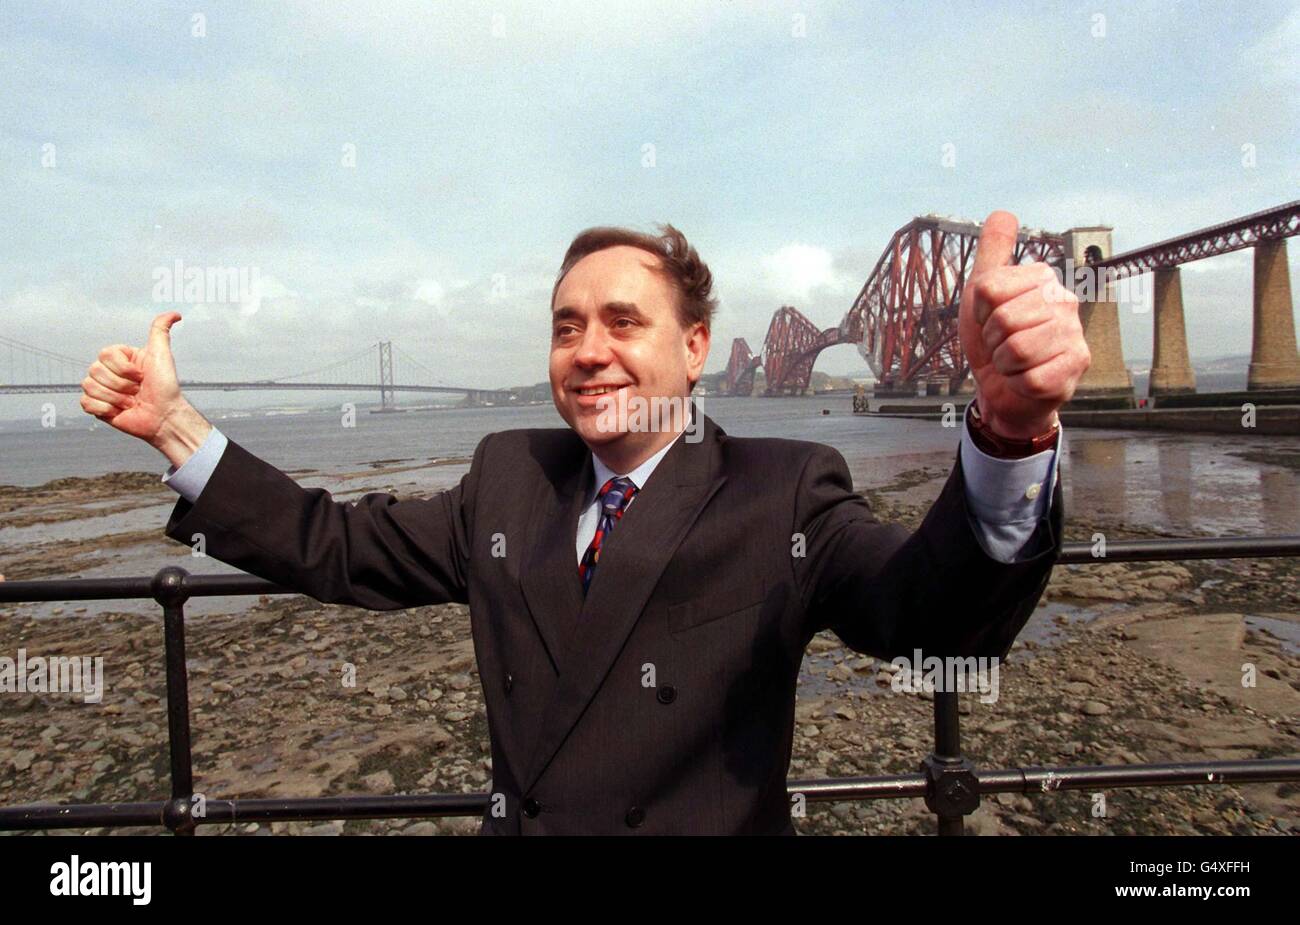 Scottish National Party leader Alex Salmond poses for photographs by the Forth rail bridge on the final day of his Scottish Parliament election campaign tour of Scotland. Stock Photo